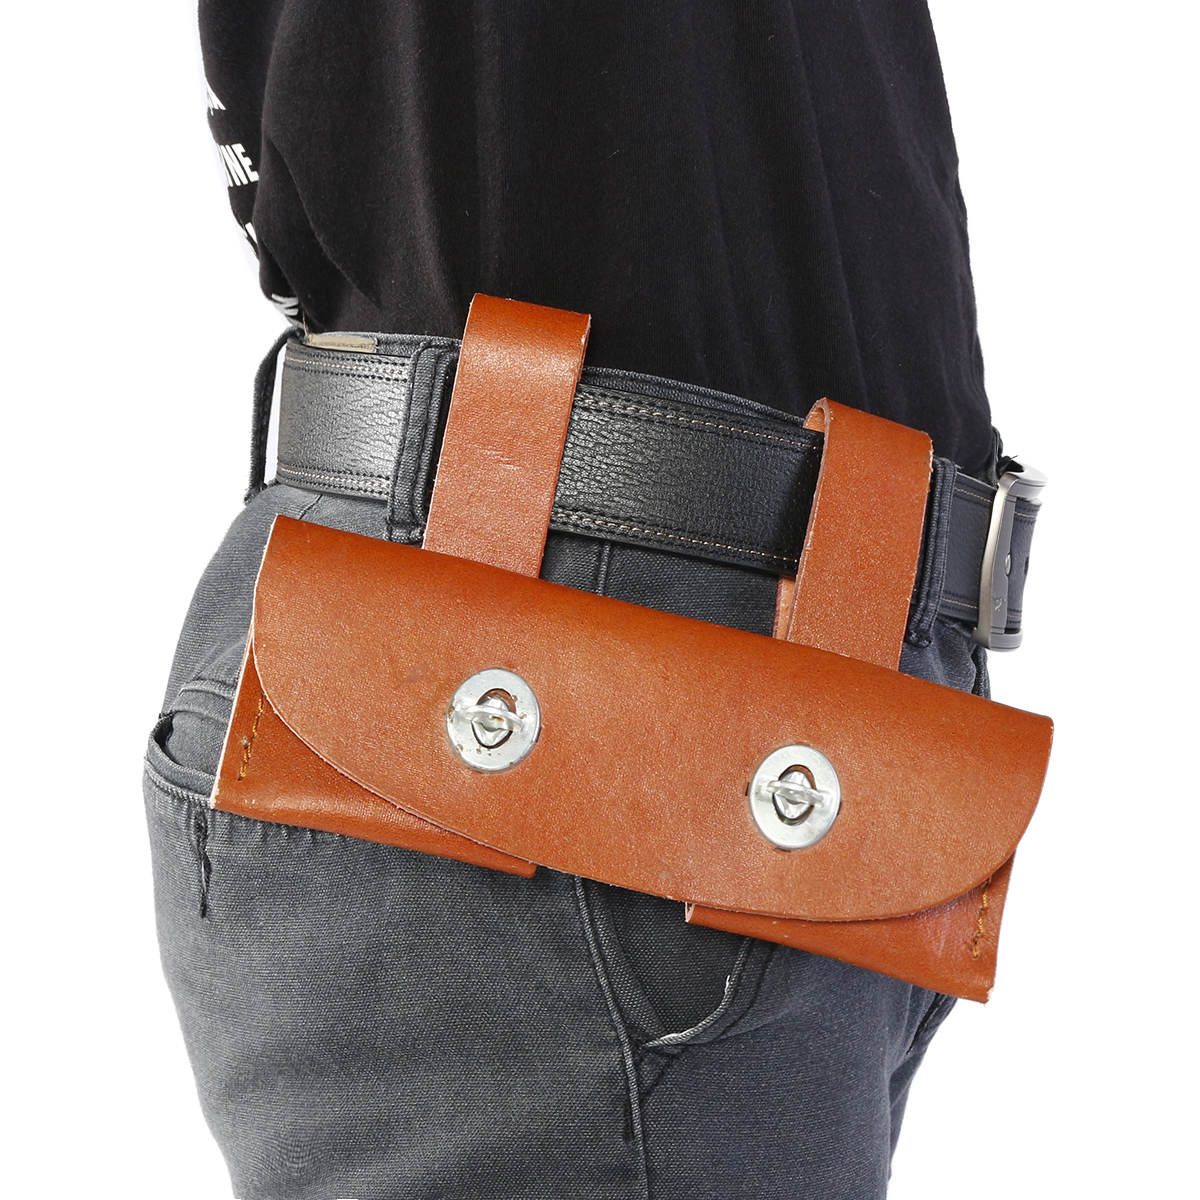 

Tool Leather Sheath Waist Holster Cover Fire Protection Rescue its 2.25 lb. Tools Waist Bag